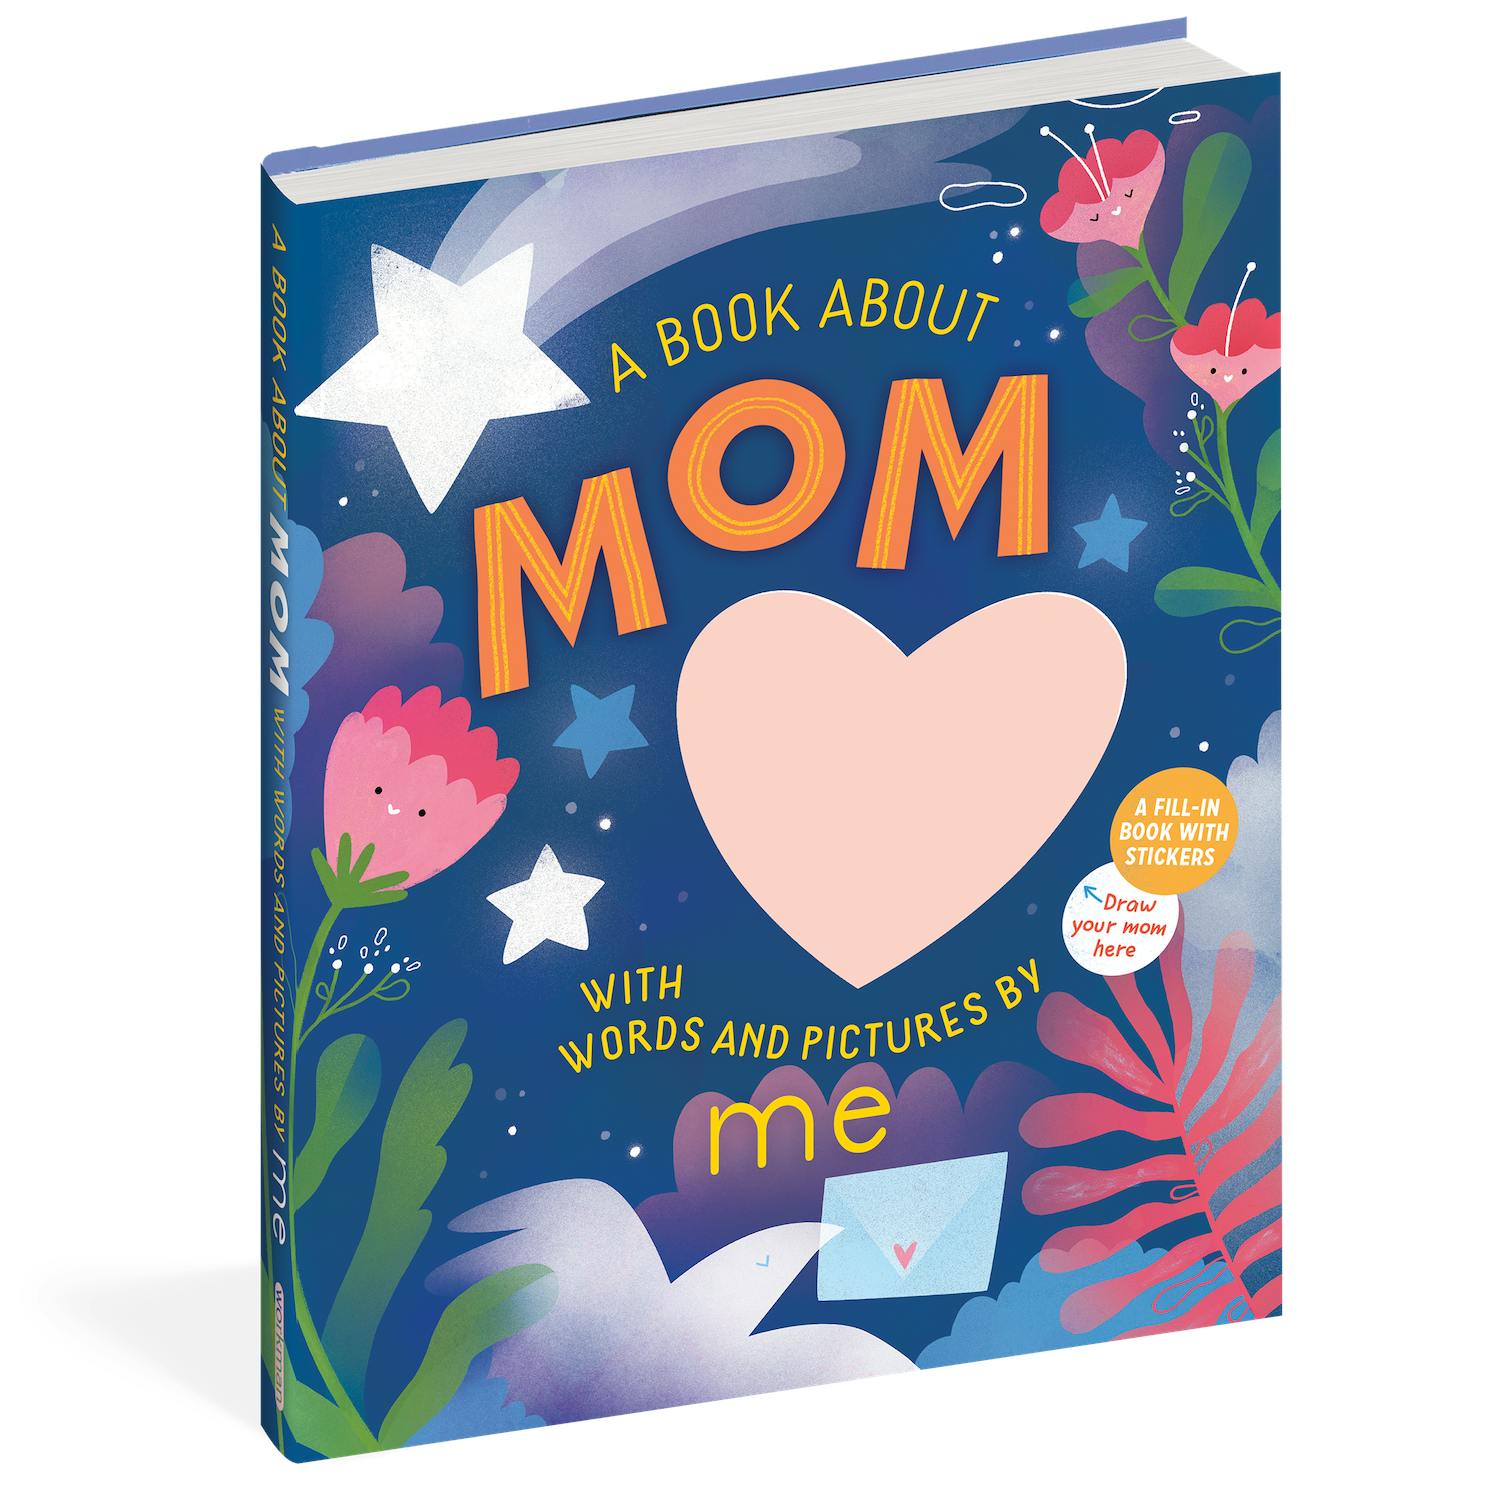 Workman Publishing A Book about Mom with Words and Pictures by Me